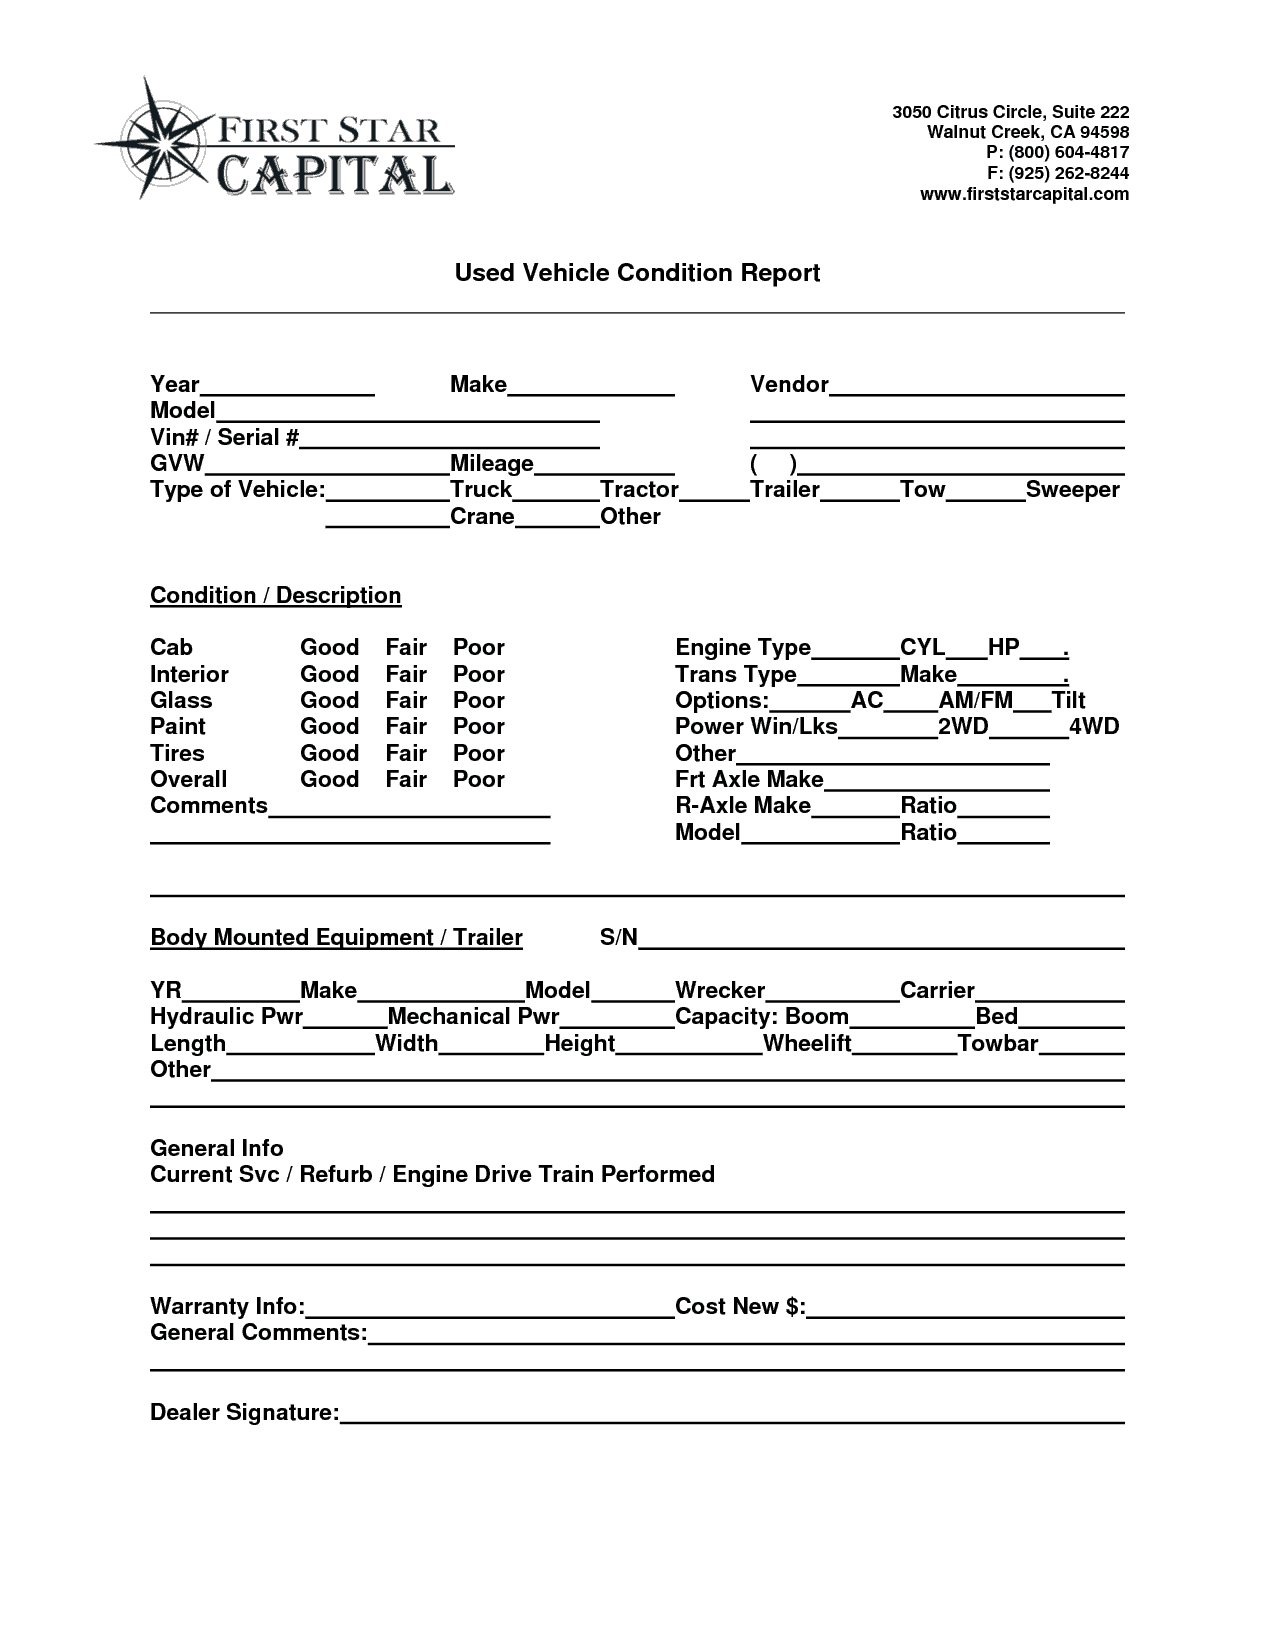 Vehicle Condition Report Template 90